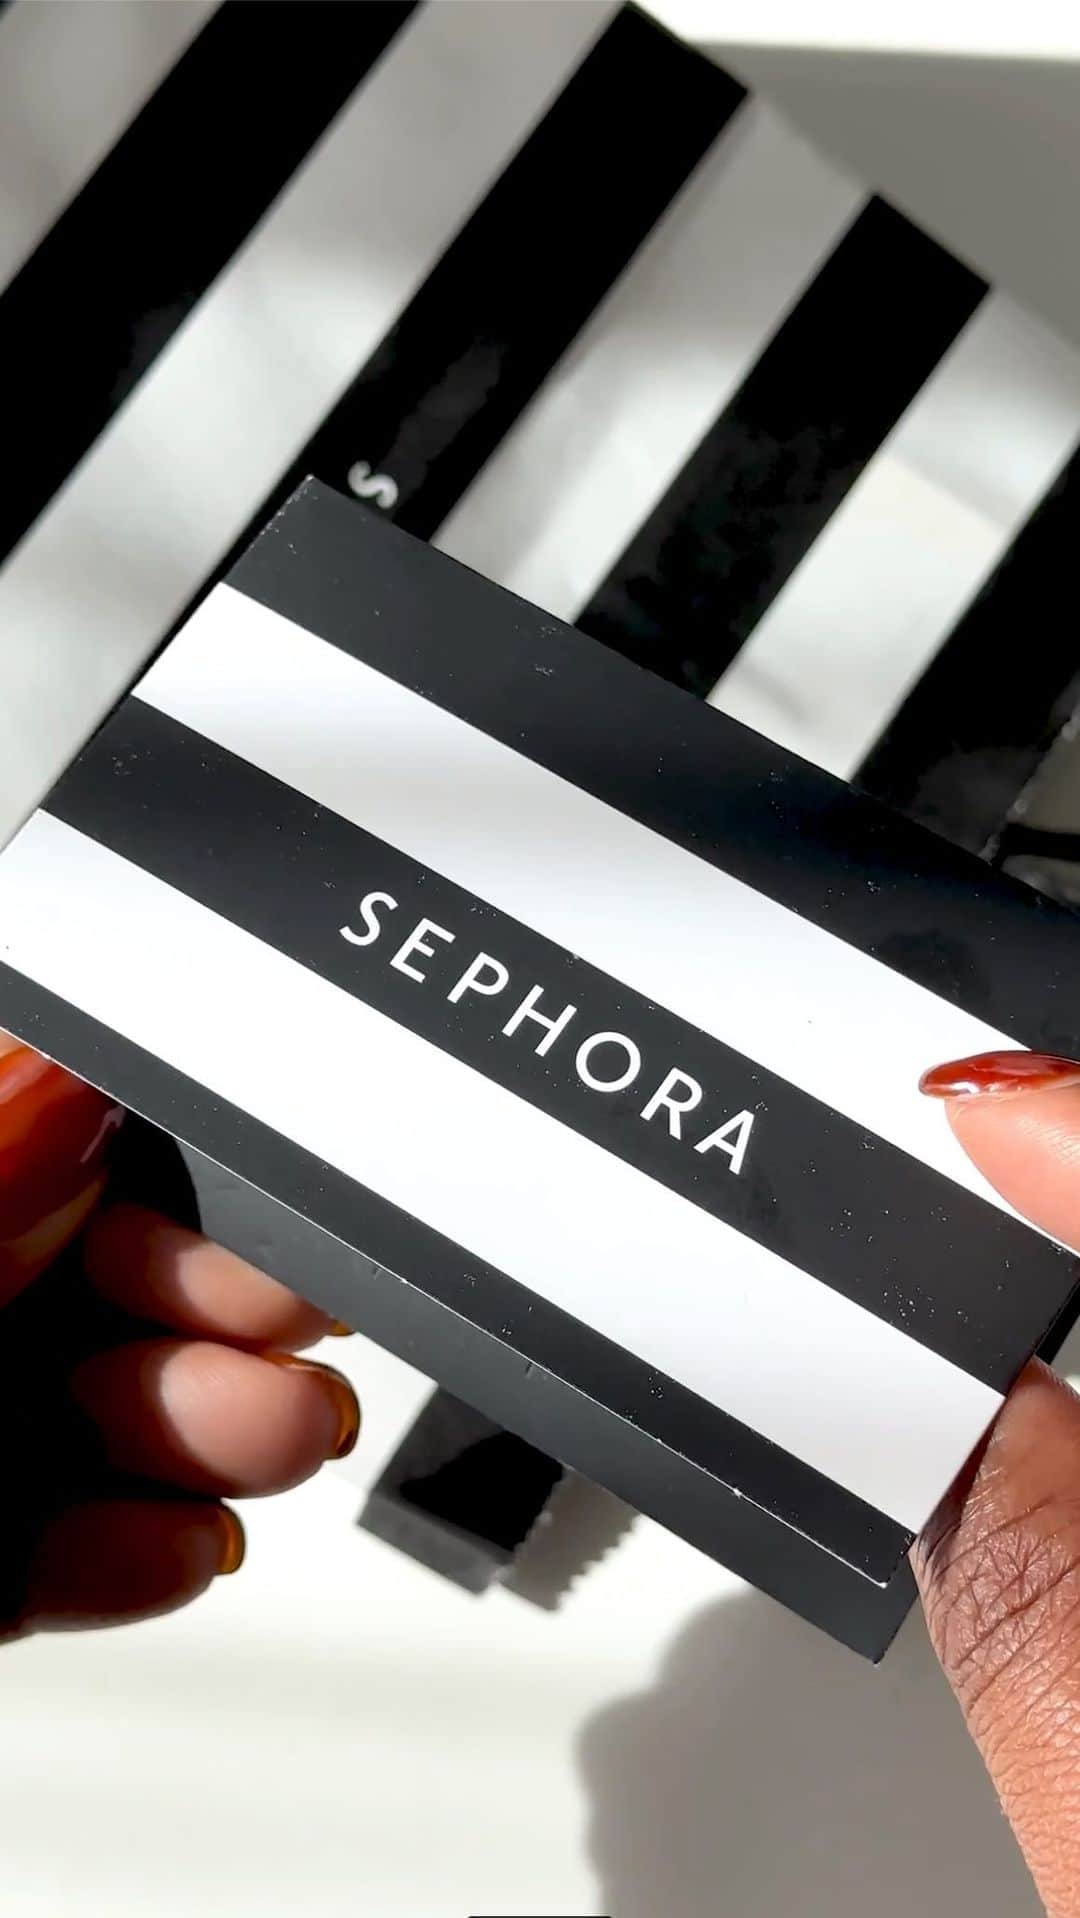 Milk Makeupのインスタグラム：「🤑 GIVEAWAY 🤑 In honor of the @Sephora Savings Event we’ve decided to gift 1 lucky winner a $100 #SephoraGiftCard to kick off their shopping spree🎁  TO ENTER: 1️⃣ Like this post + follow @milkmakeup (we’ll be checking!) 2️⃣ Comment what Milk Makeup product you’re planning to stock up on during the Sephora Savings Event 3️⃣ Tag 2 friends to share the love  Giveaway ends 10/23 @11:59pm EST. Must be US/Canada based and 18+ to enter」